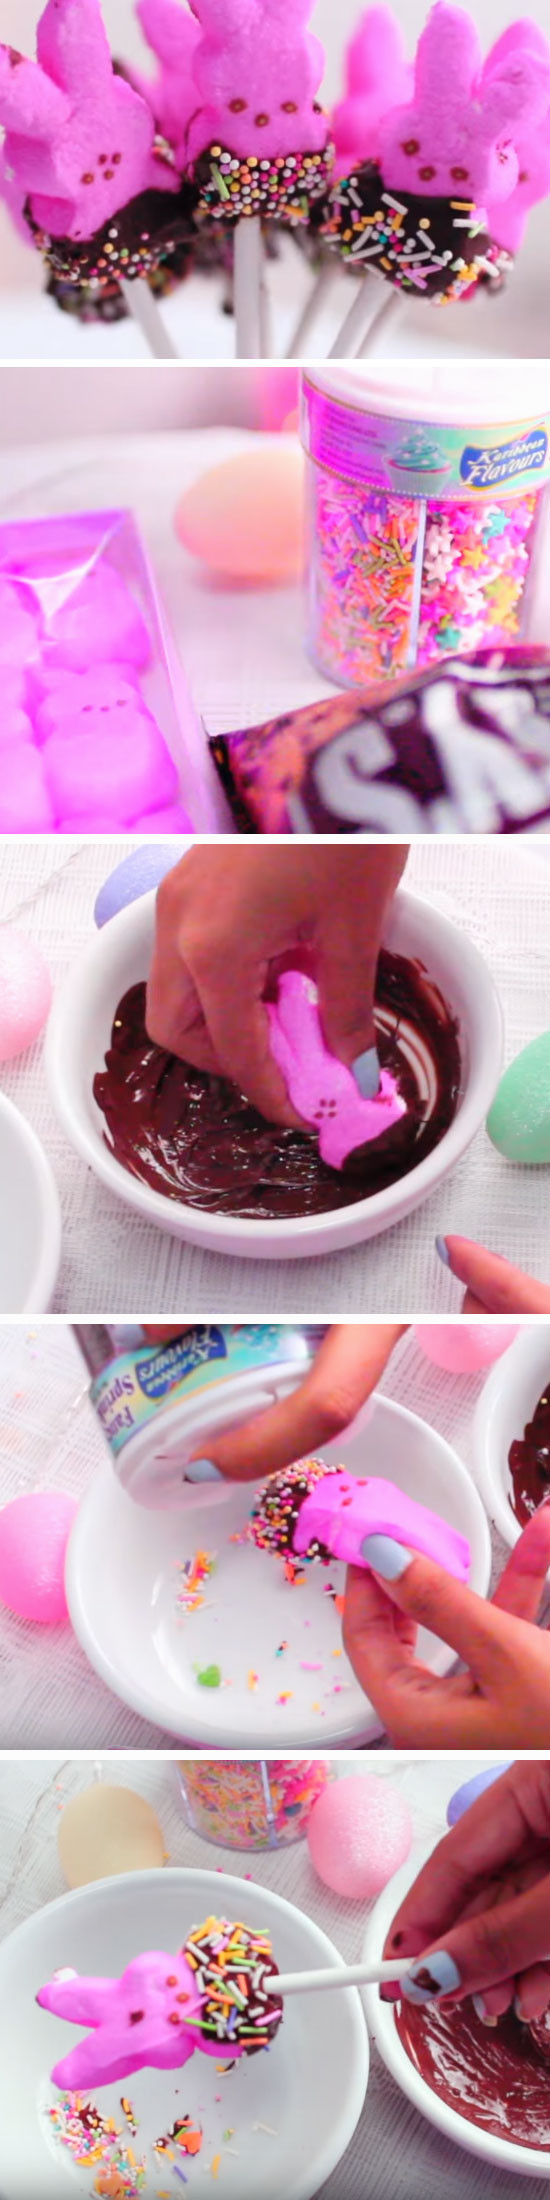 Easter Party Favor Ideas
 21 DIY Easter Party Favor Ideas for Teens